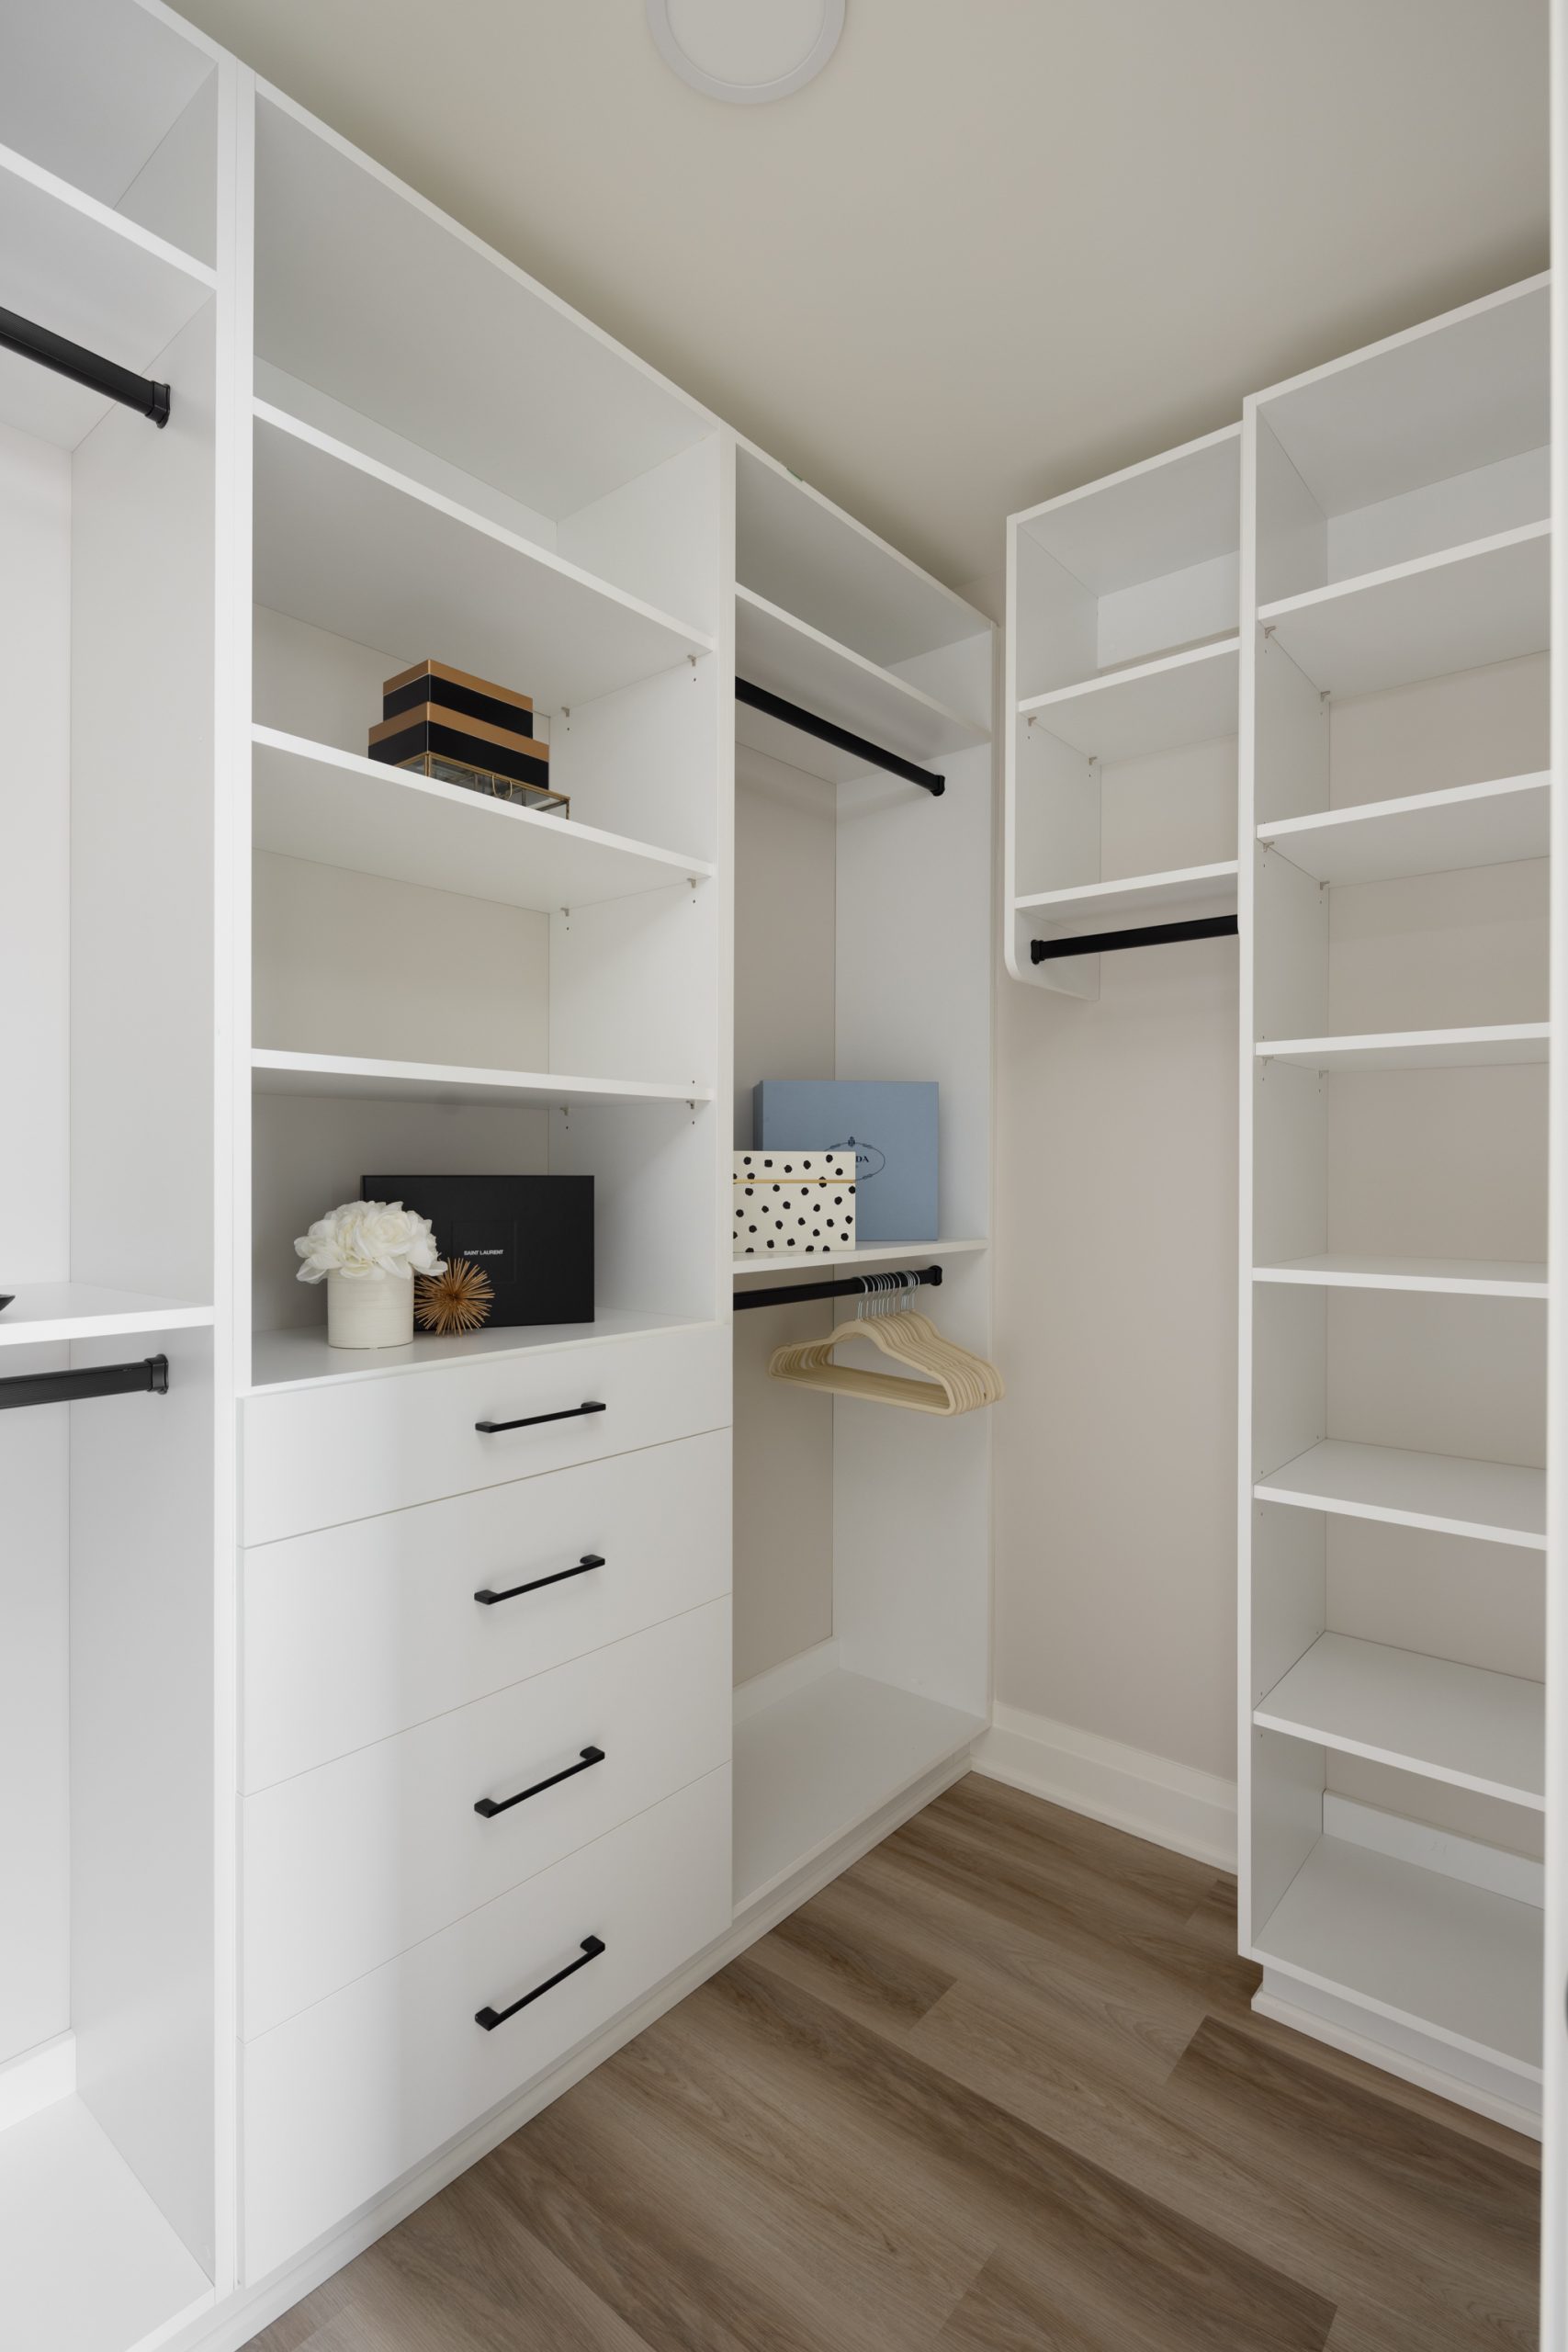 walk-in closet featuring lots of storage in white cabinets.